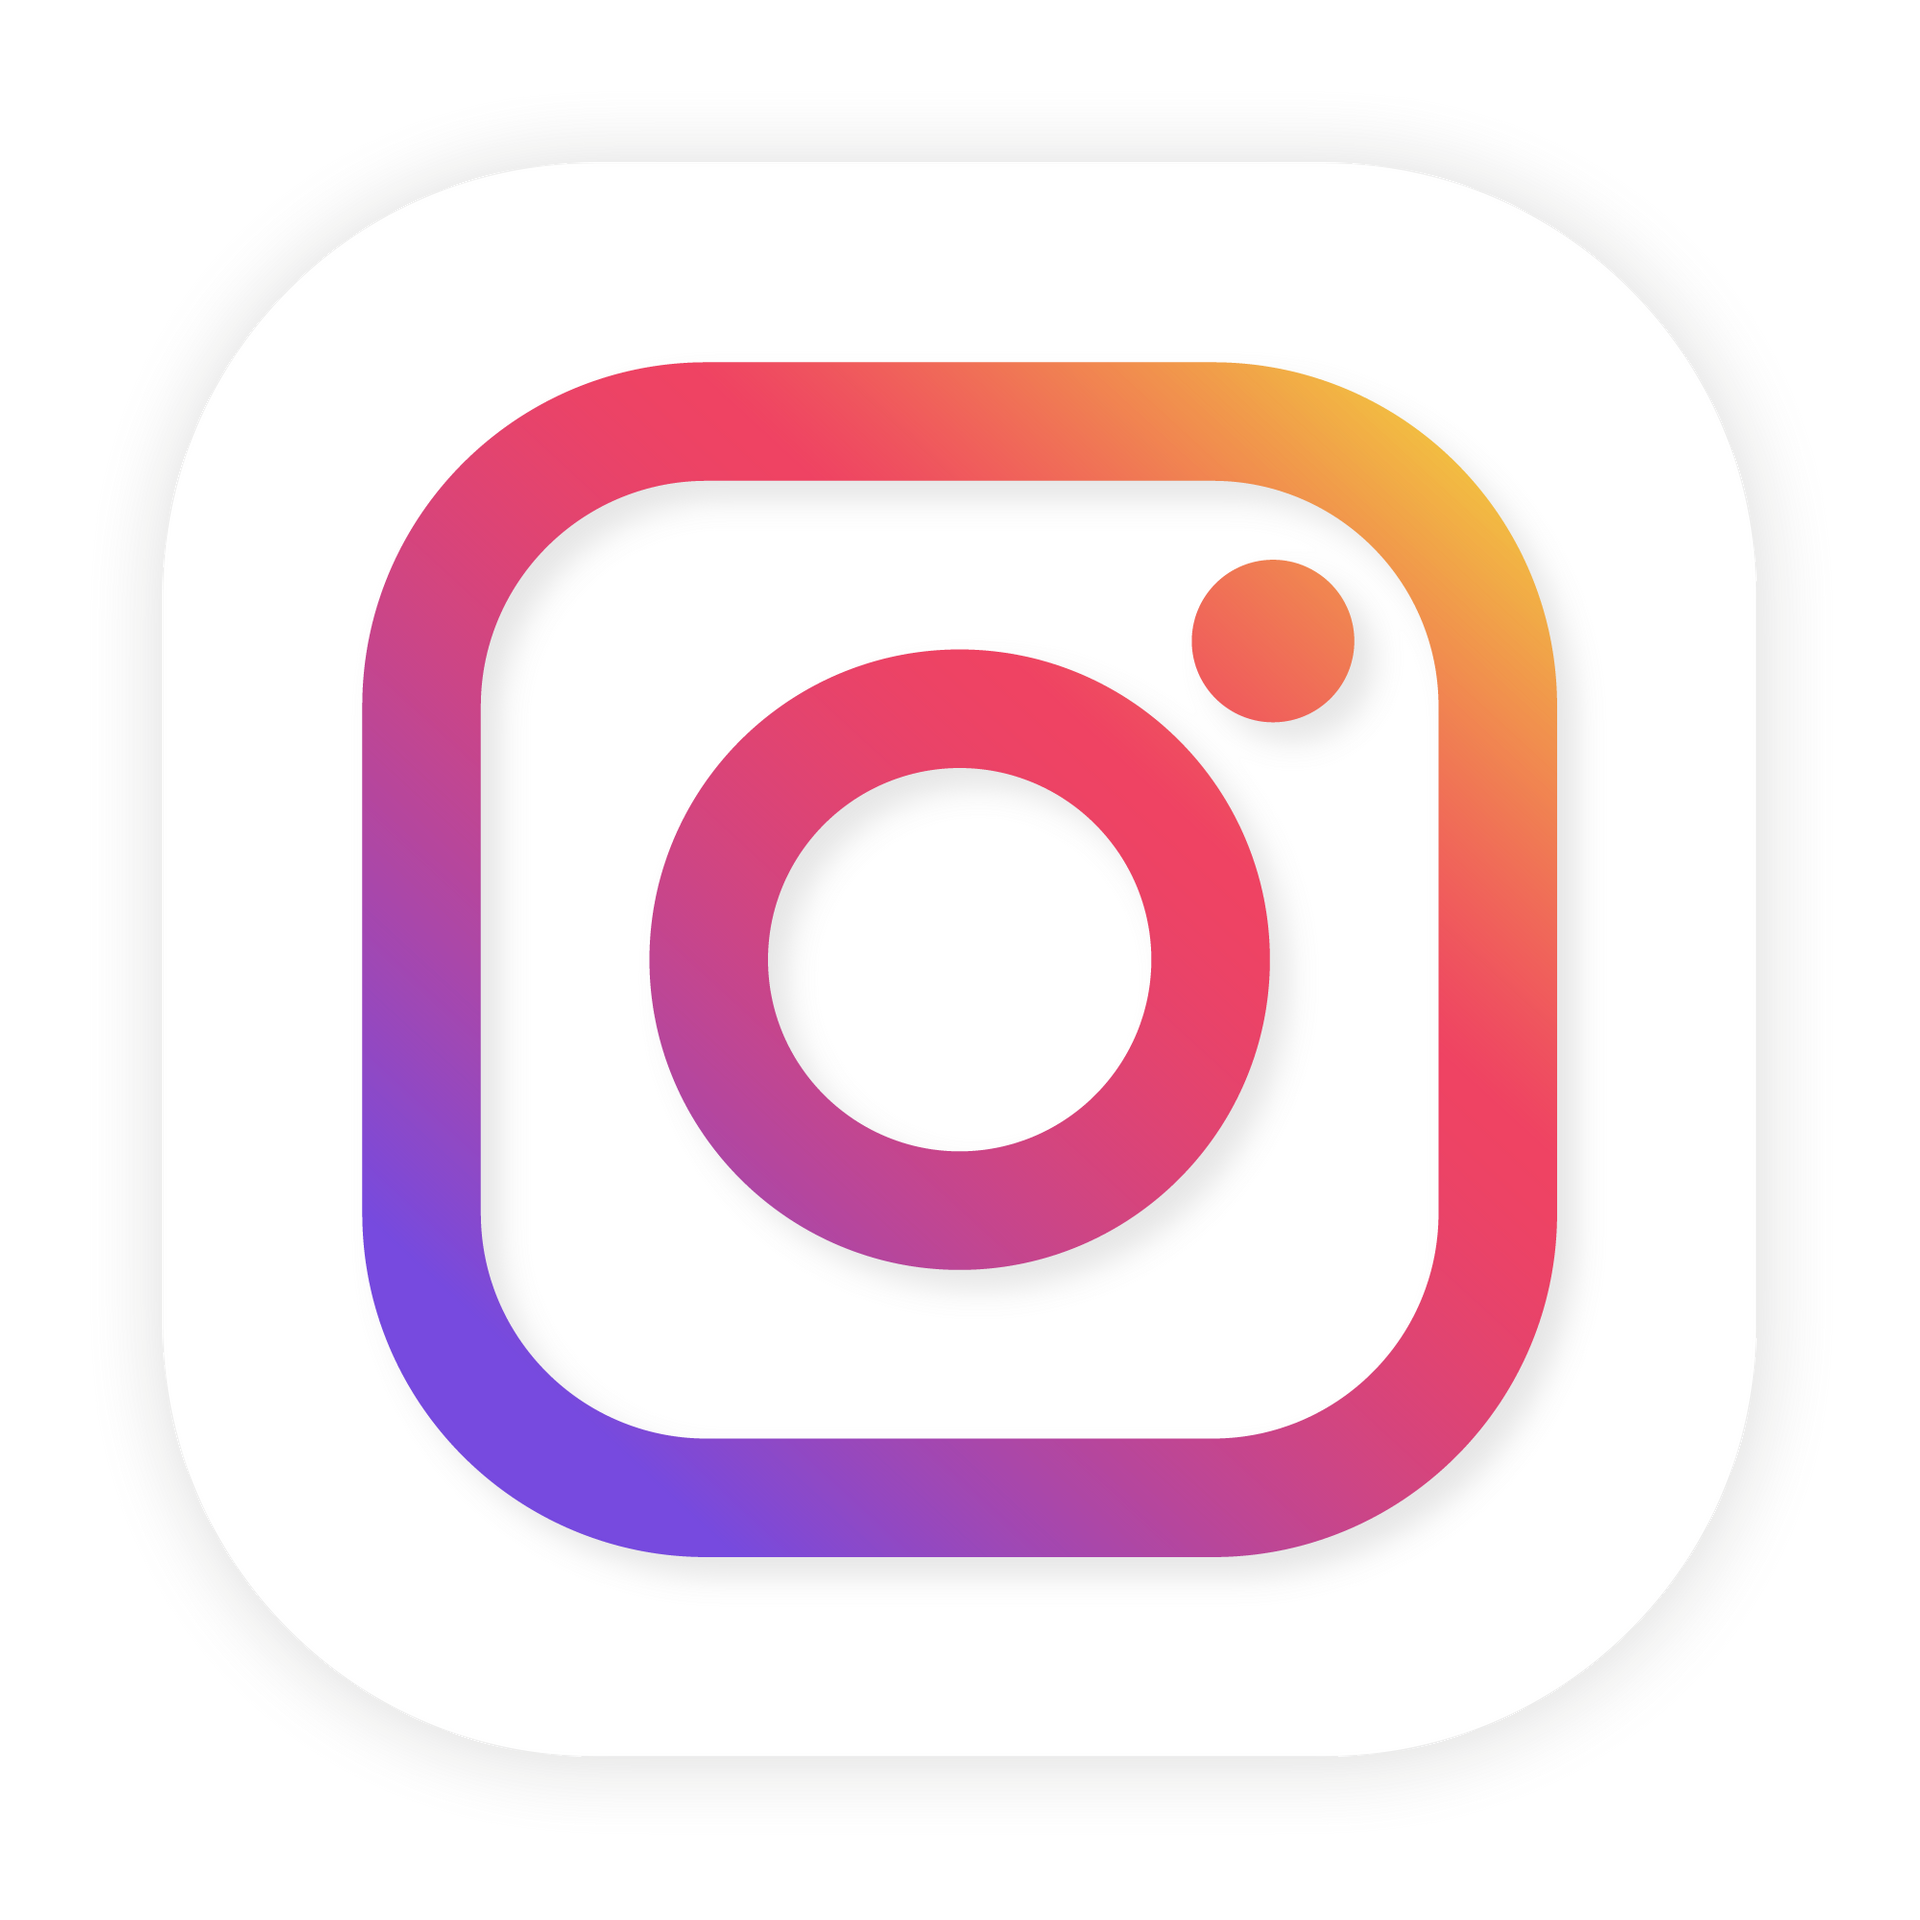 The instagram logo is a square with a circle in the middle.